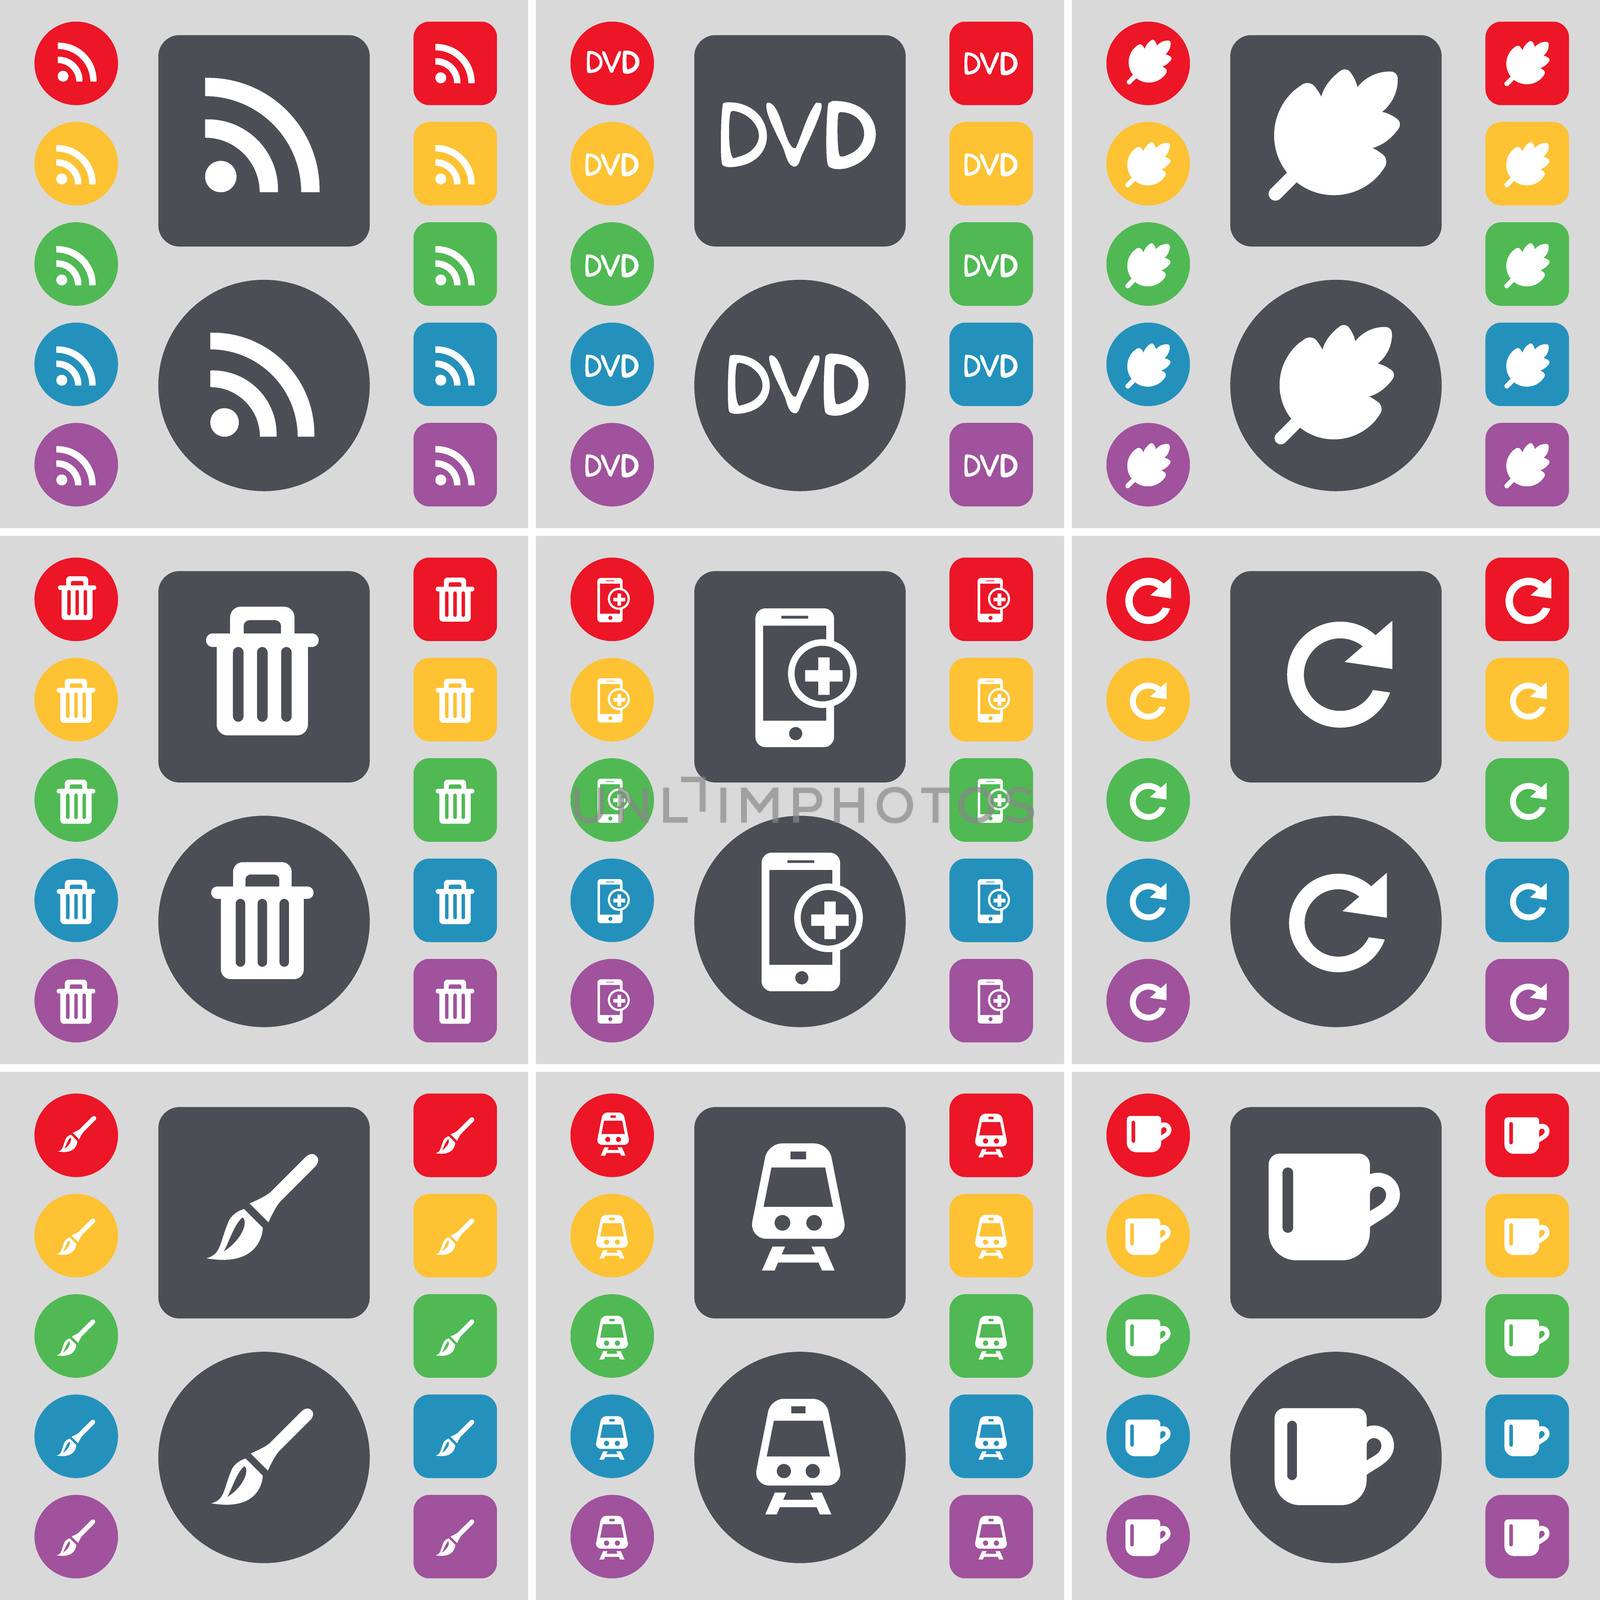 RSS, DVD, Leaf, Trash can, Smartphone, Reload, Brush, Train, Cup icon symbol. A large set of flat, colored buttons for your design. illustration